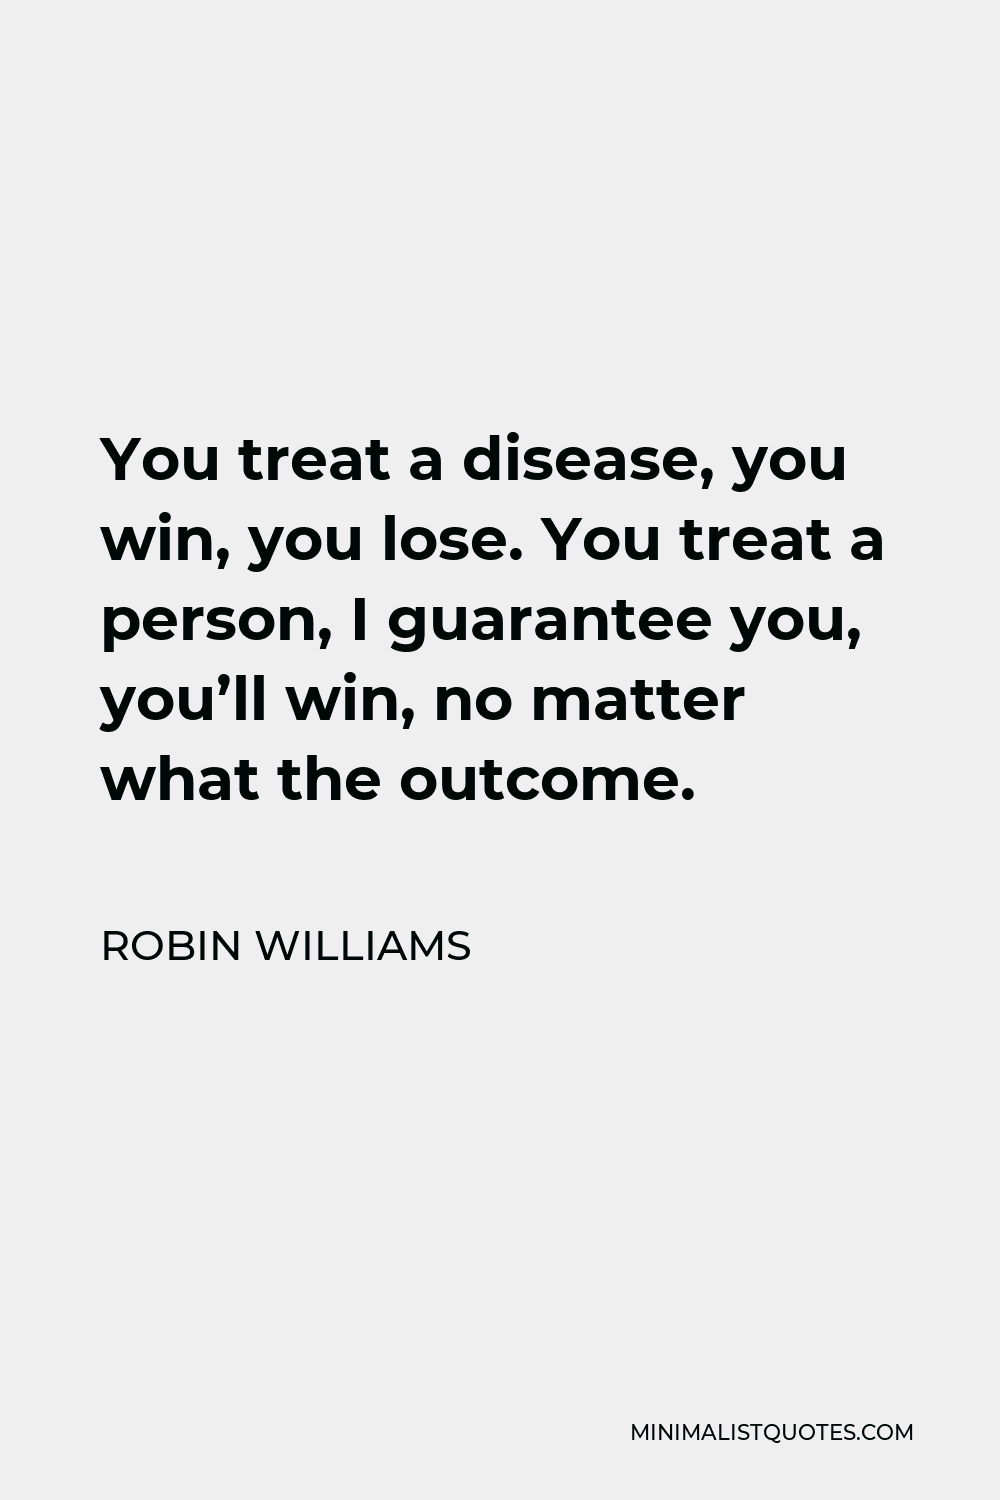 Robin Williams Quote - You treat a disease, you win, you lose. You treat a person, I guarantee you, you’ll win, no matter what the outcome.